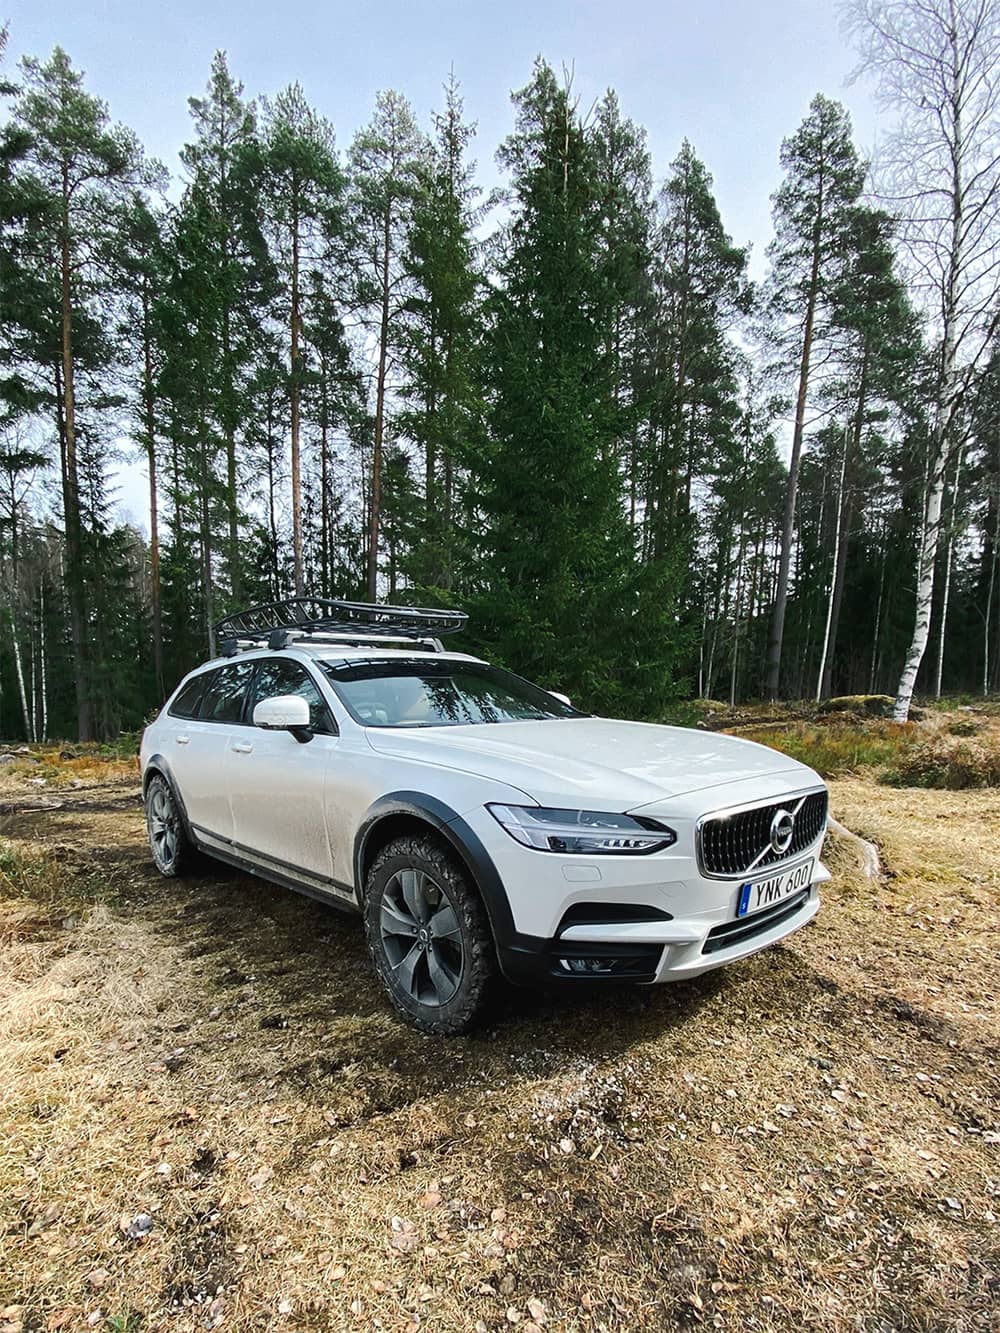 2018 Volvo V90 Cross Country off-roading in the forest